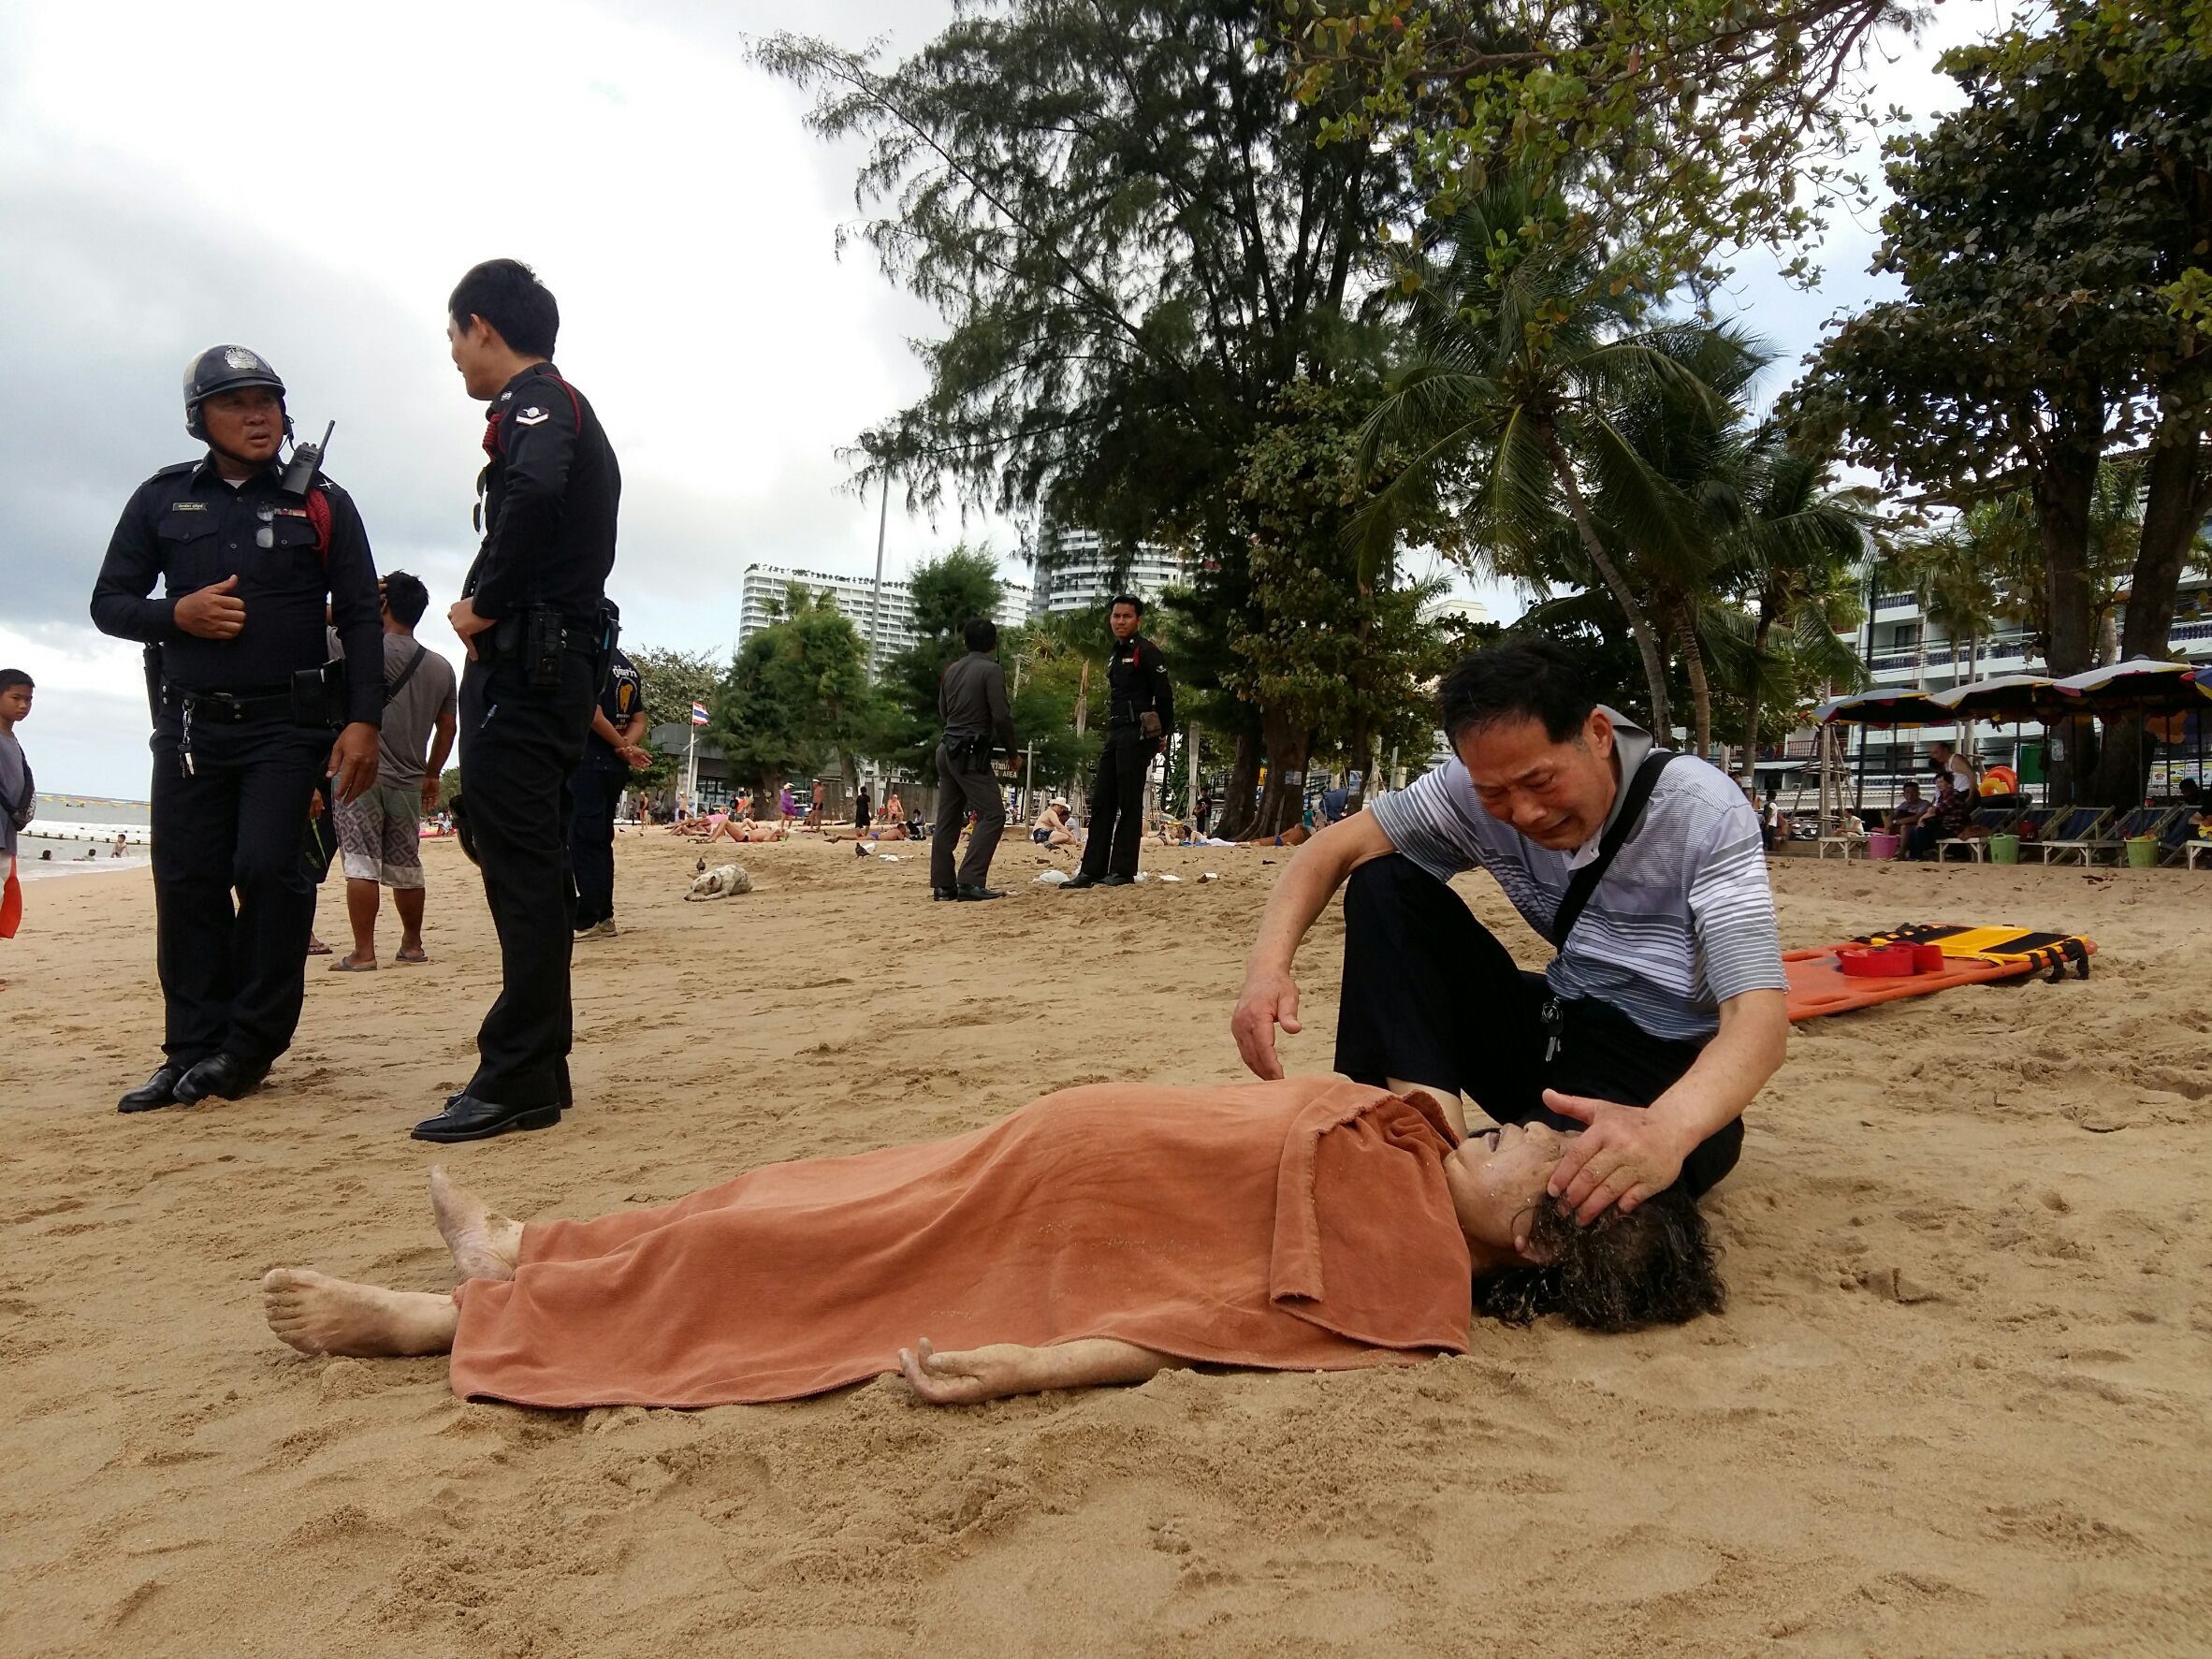 A Chinese Tourist Has Died After Drowning At The Beach In Jomtien